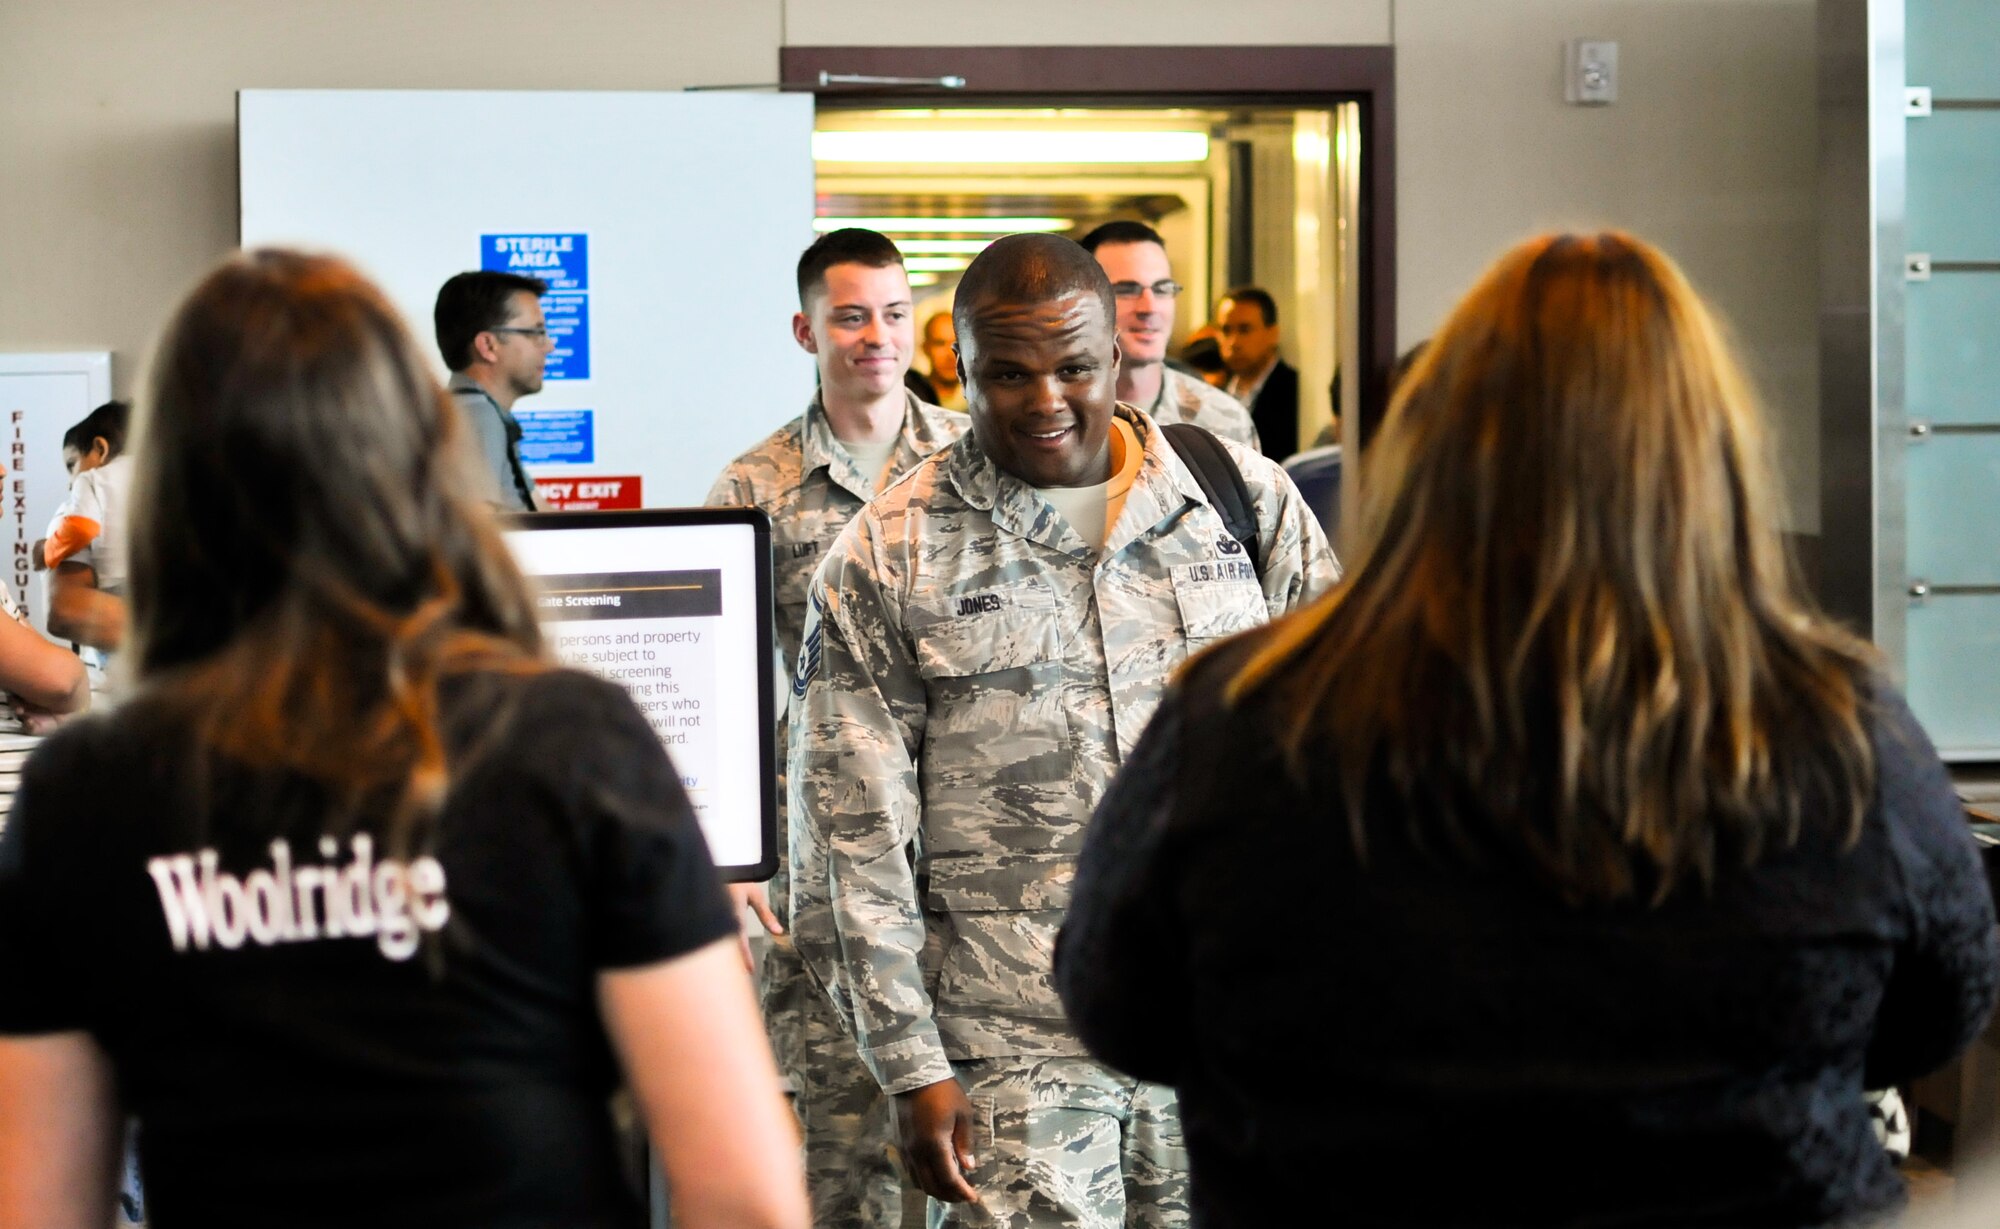 U.S. Air Force Master Sgt. Christopher R. Jones, squad leader with the 182nd Security Forces Squadron, leads the way as his Airmen arrive home at the General Wayne A. Downing Peoria International Airport in Peoria, Ill., Aug. 6, 2014. He and 17 Illinois Air National Guardsmen deployed to Southwest Asia for seven months in support of Operation Enduring Freedom. They were assigned to the 405th Expeditionary Security Forces Squadron overseas, where they were responsible for law enforcement and security missions in the region’s global war on terror. (U.S. Air National Guard photo by Staff Sgt. Lealan Buehrer/Released)